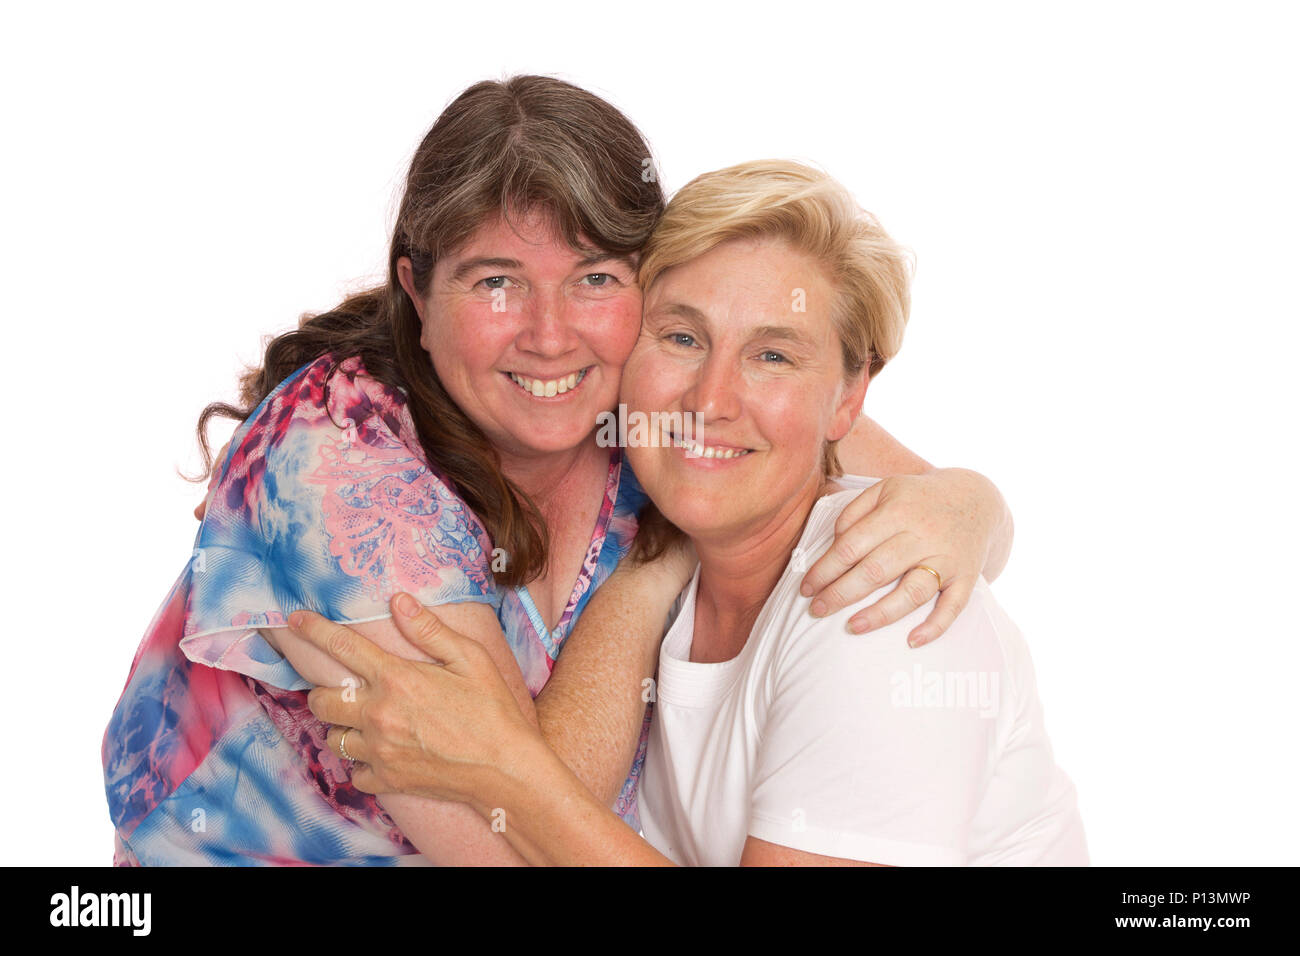 Two close friends hugging for a photo, real middle aged women. Stock Photo